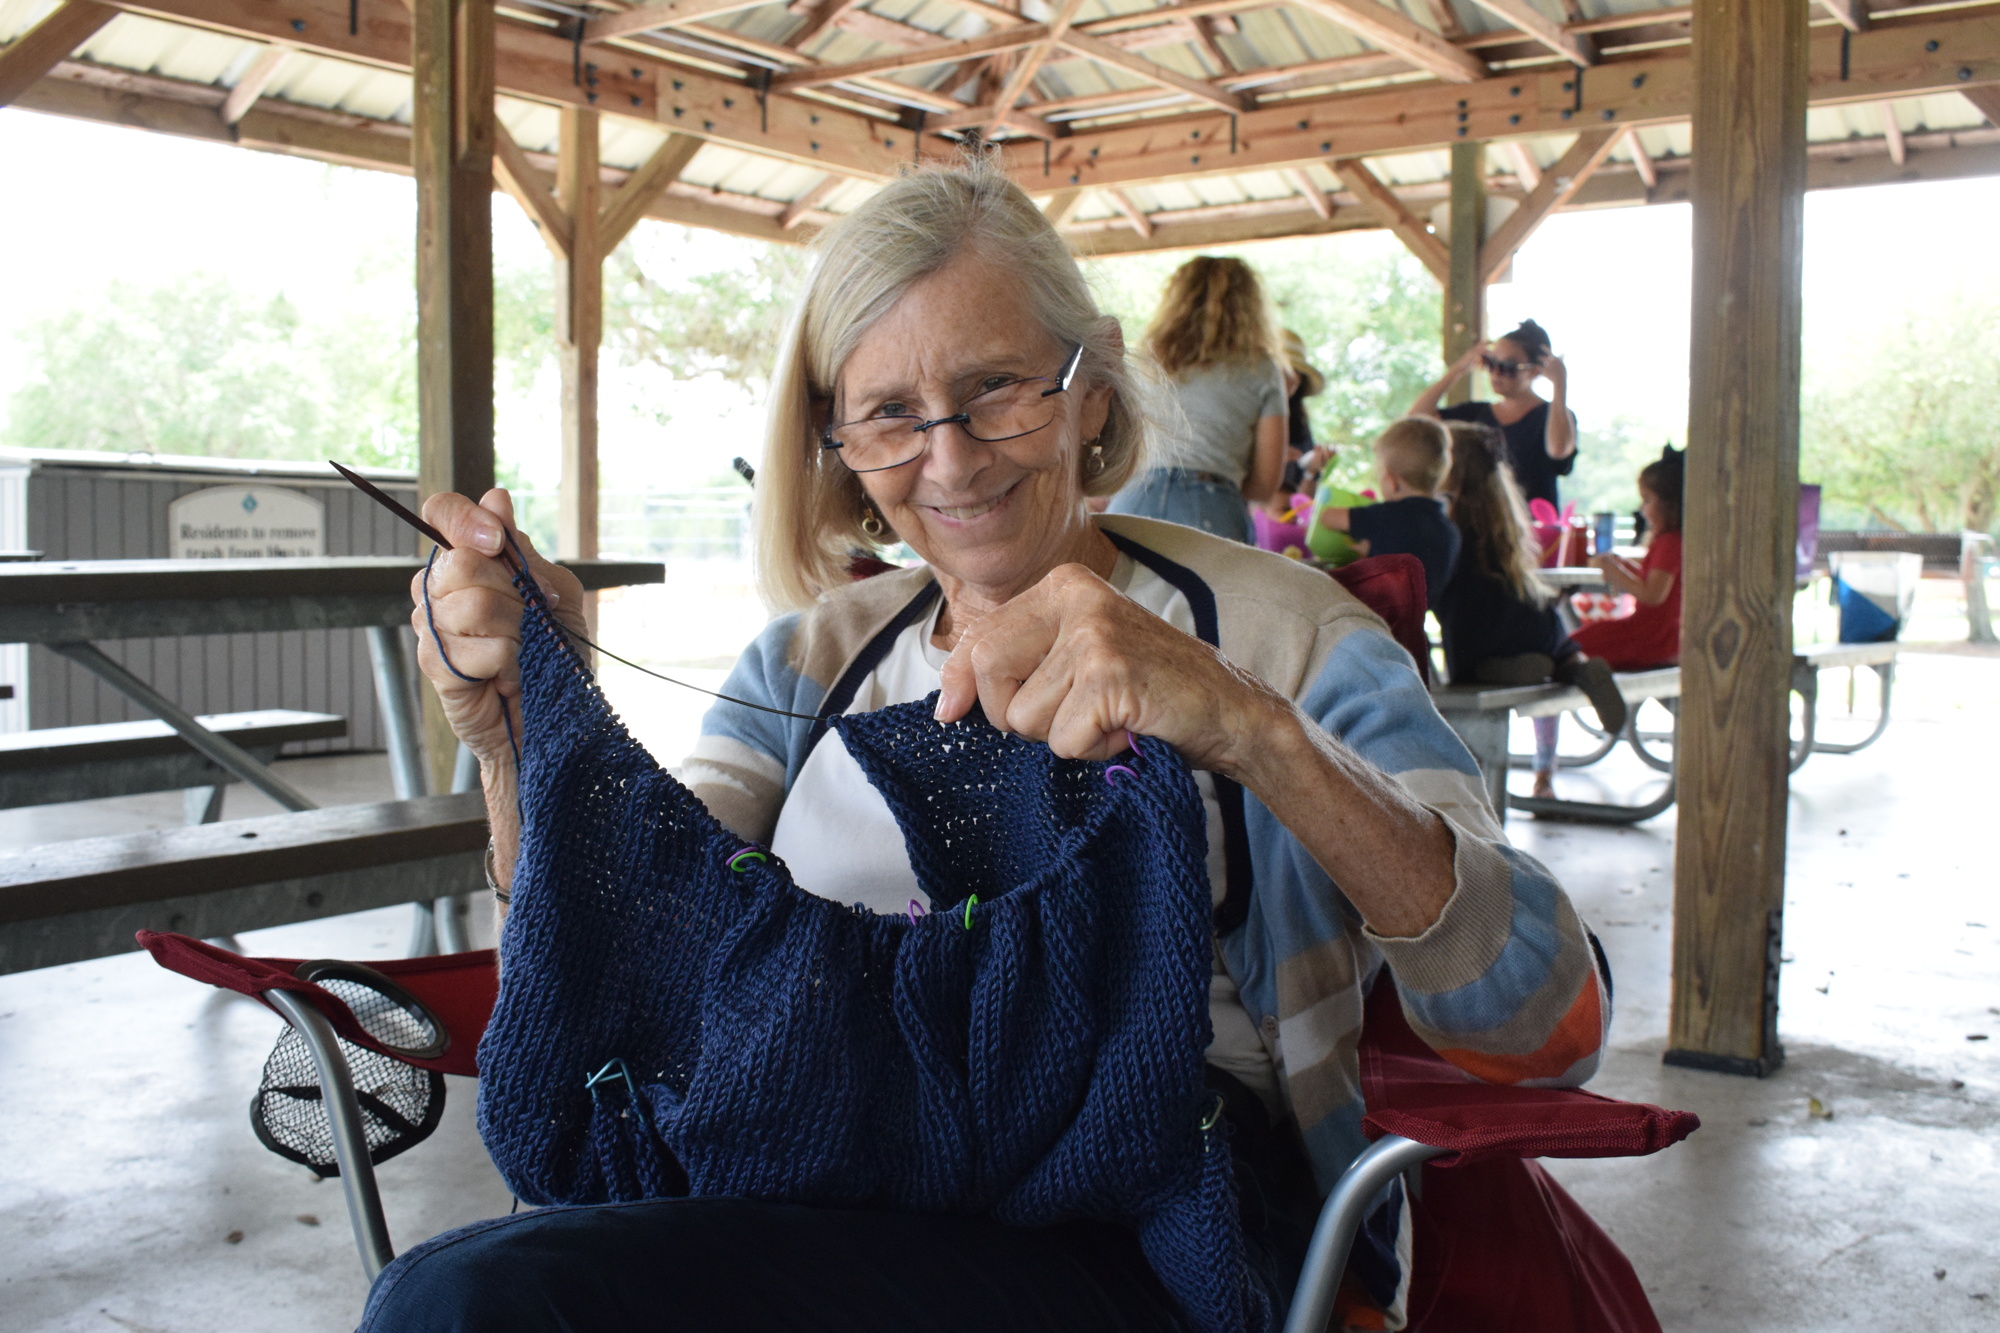 University Park's Laurie Roshfled is knitting a sweater in a method she has never tried before. She's knitting the sweater from the neck down when she usually works from the waist up.